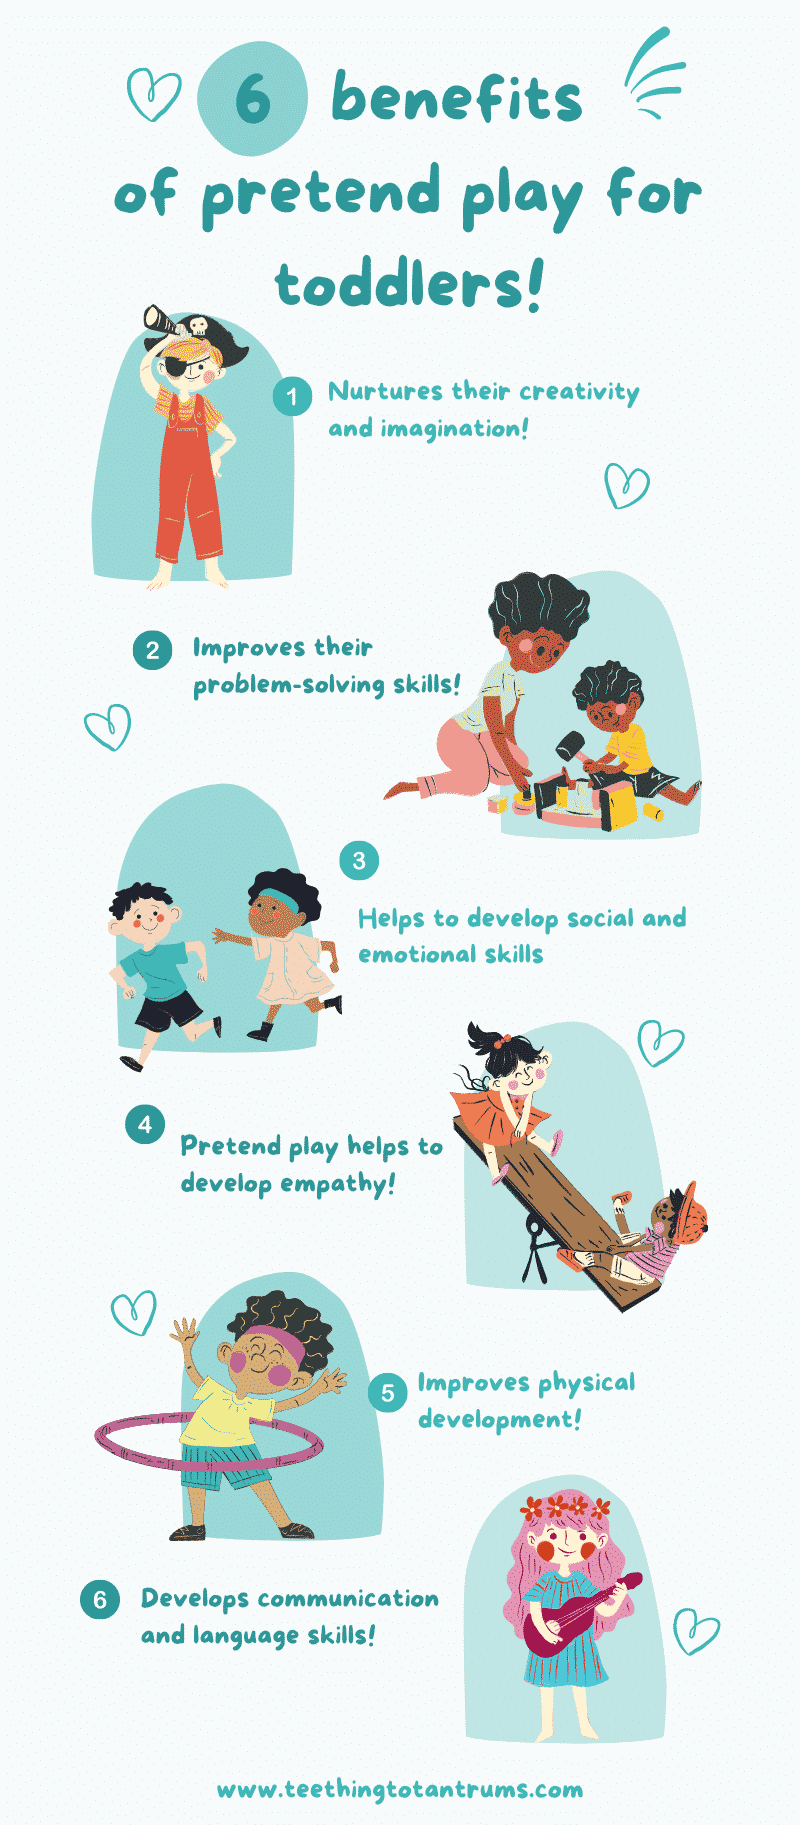 pretend-play-for-toddlers-22-examples-benefits